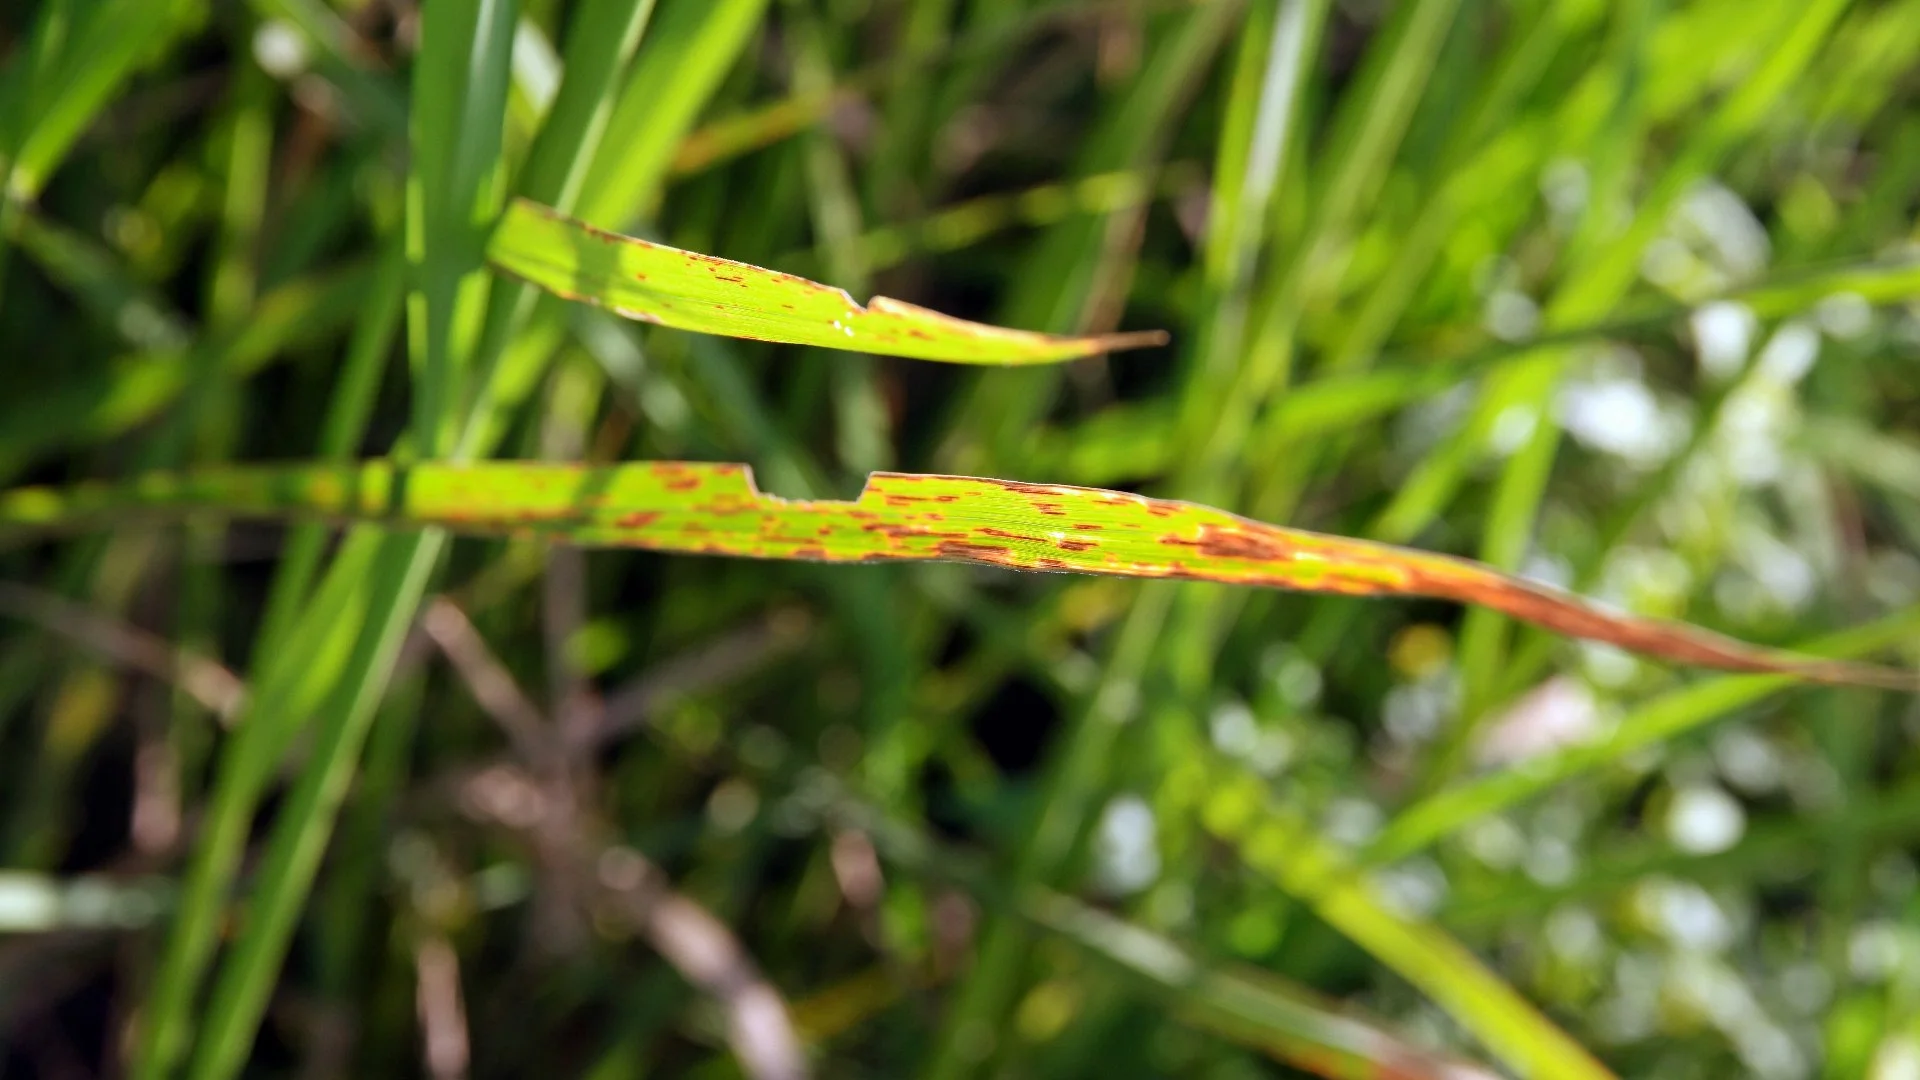 Do Your Grass Blades Have Brown Spots? It Could Be Leaf Spot!